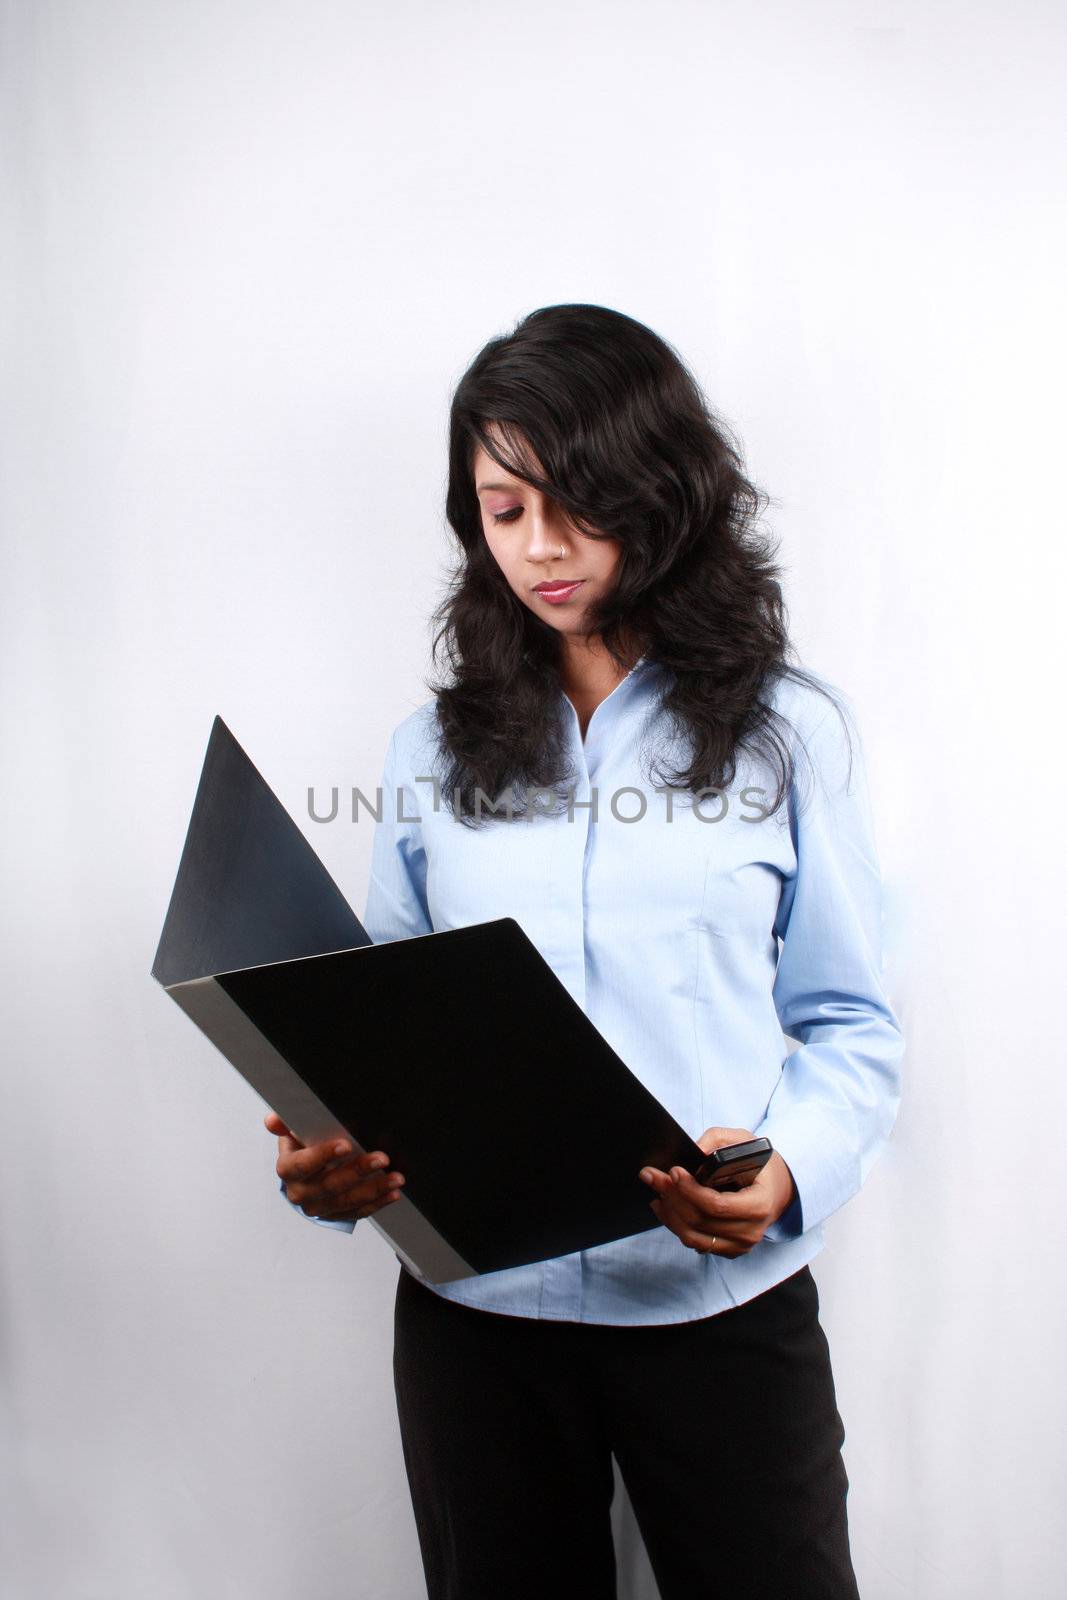 A young Indian businesswoman reading documents in a file.